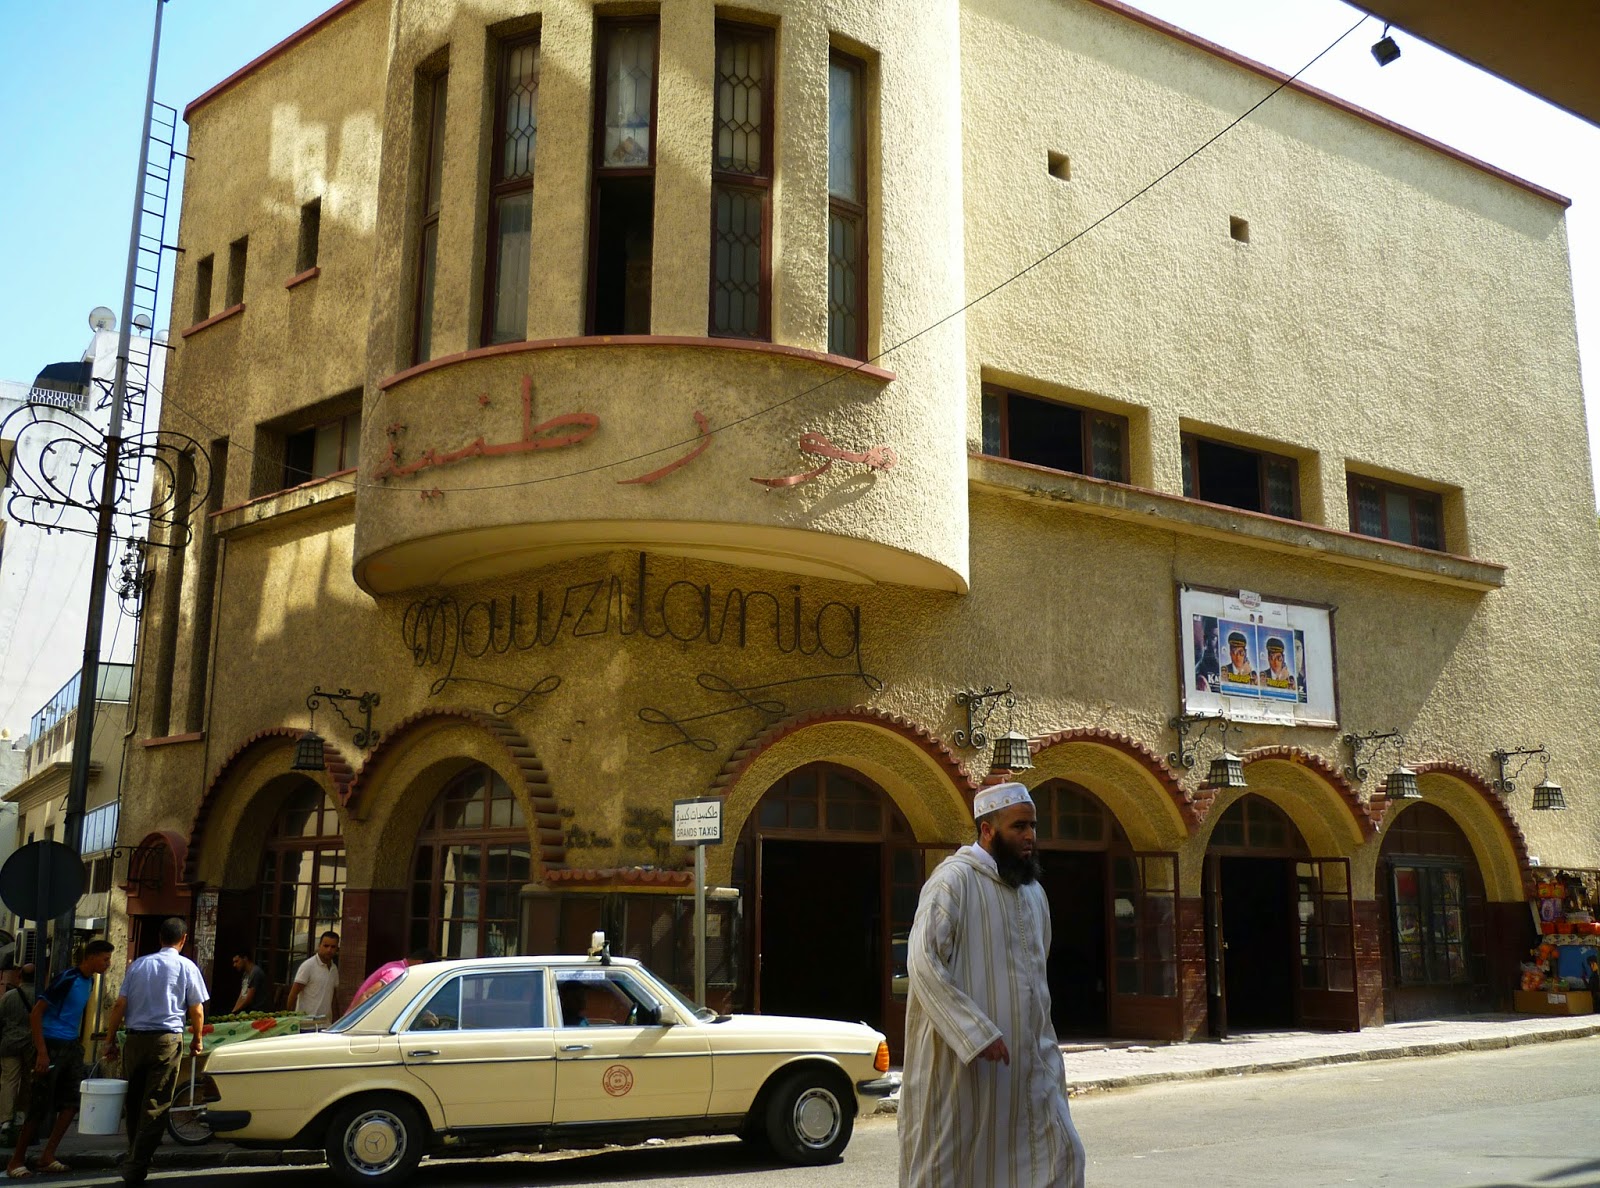 Near the African Rhythms club in Tangier owned by Randy Weston./Ph. DR